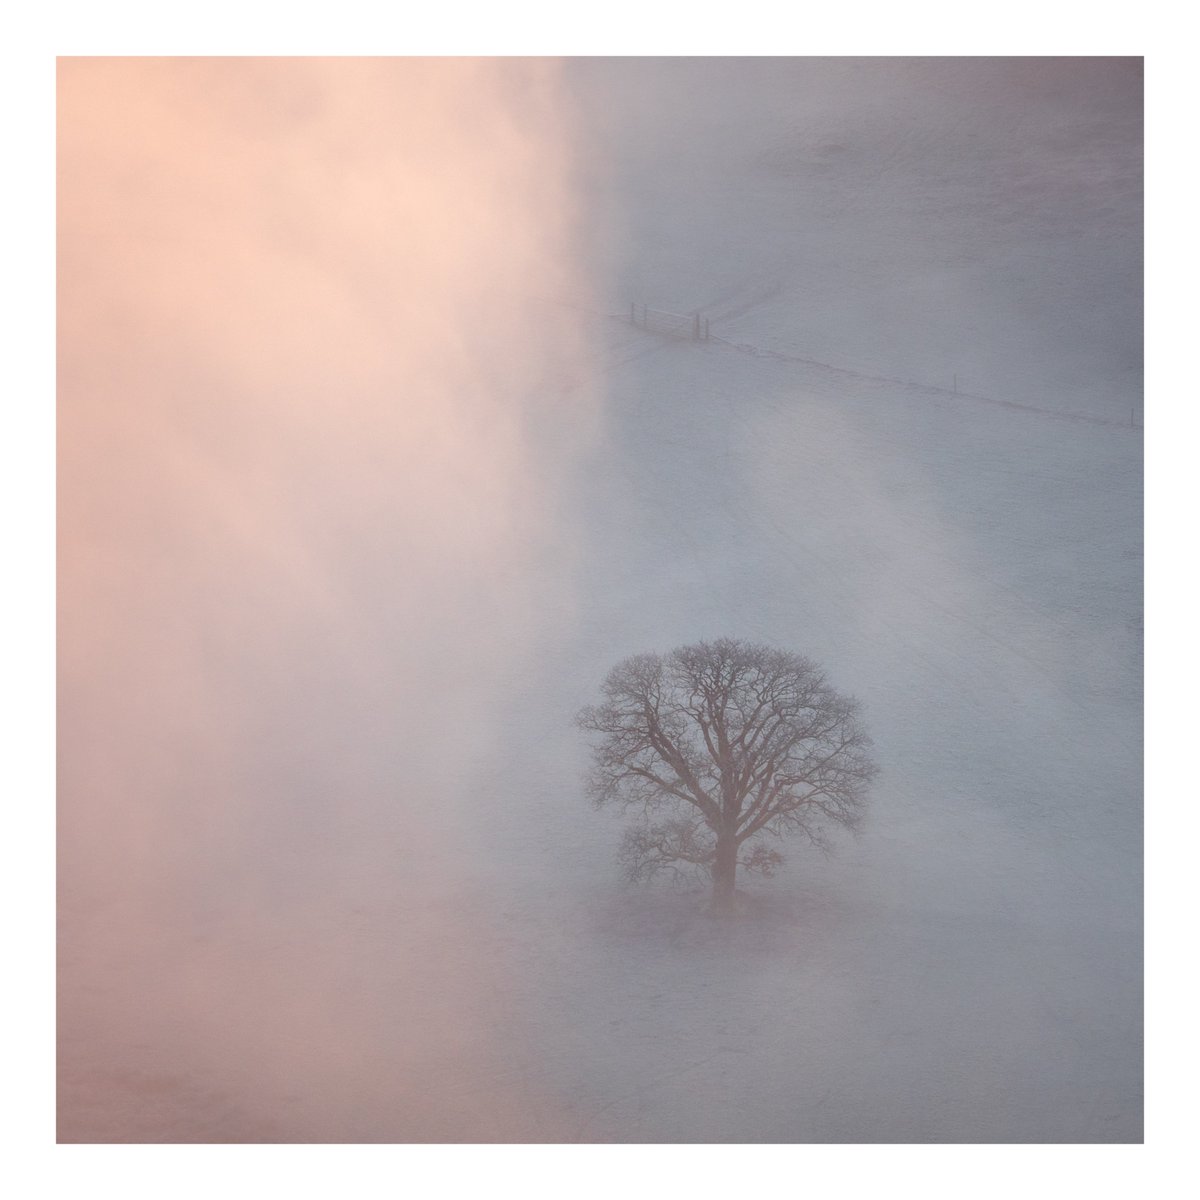 I'd forgotten about my lovely morning back in January, watching an inversion in the South Lakes. A poor little tree about to take a fog bath 😁

#landscapephotography #LakeDistrict